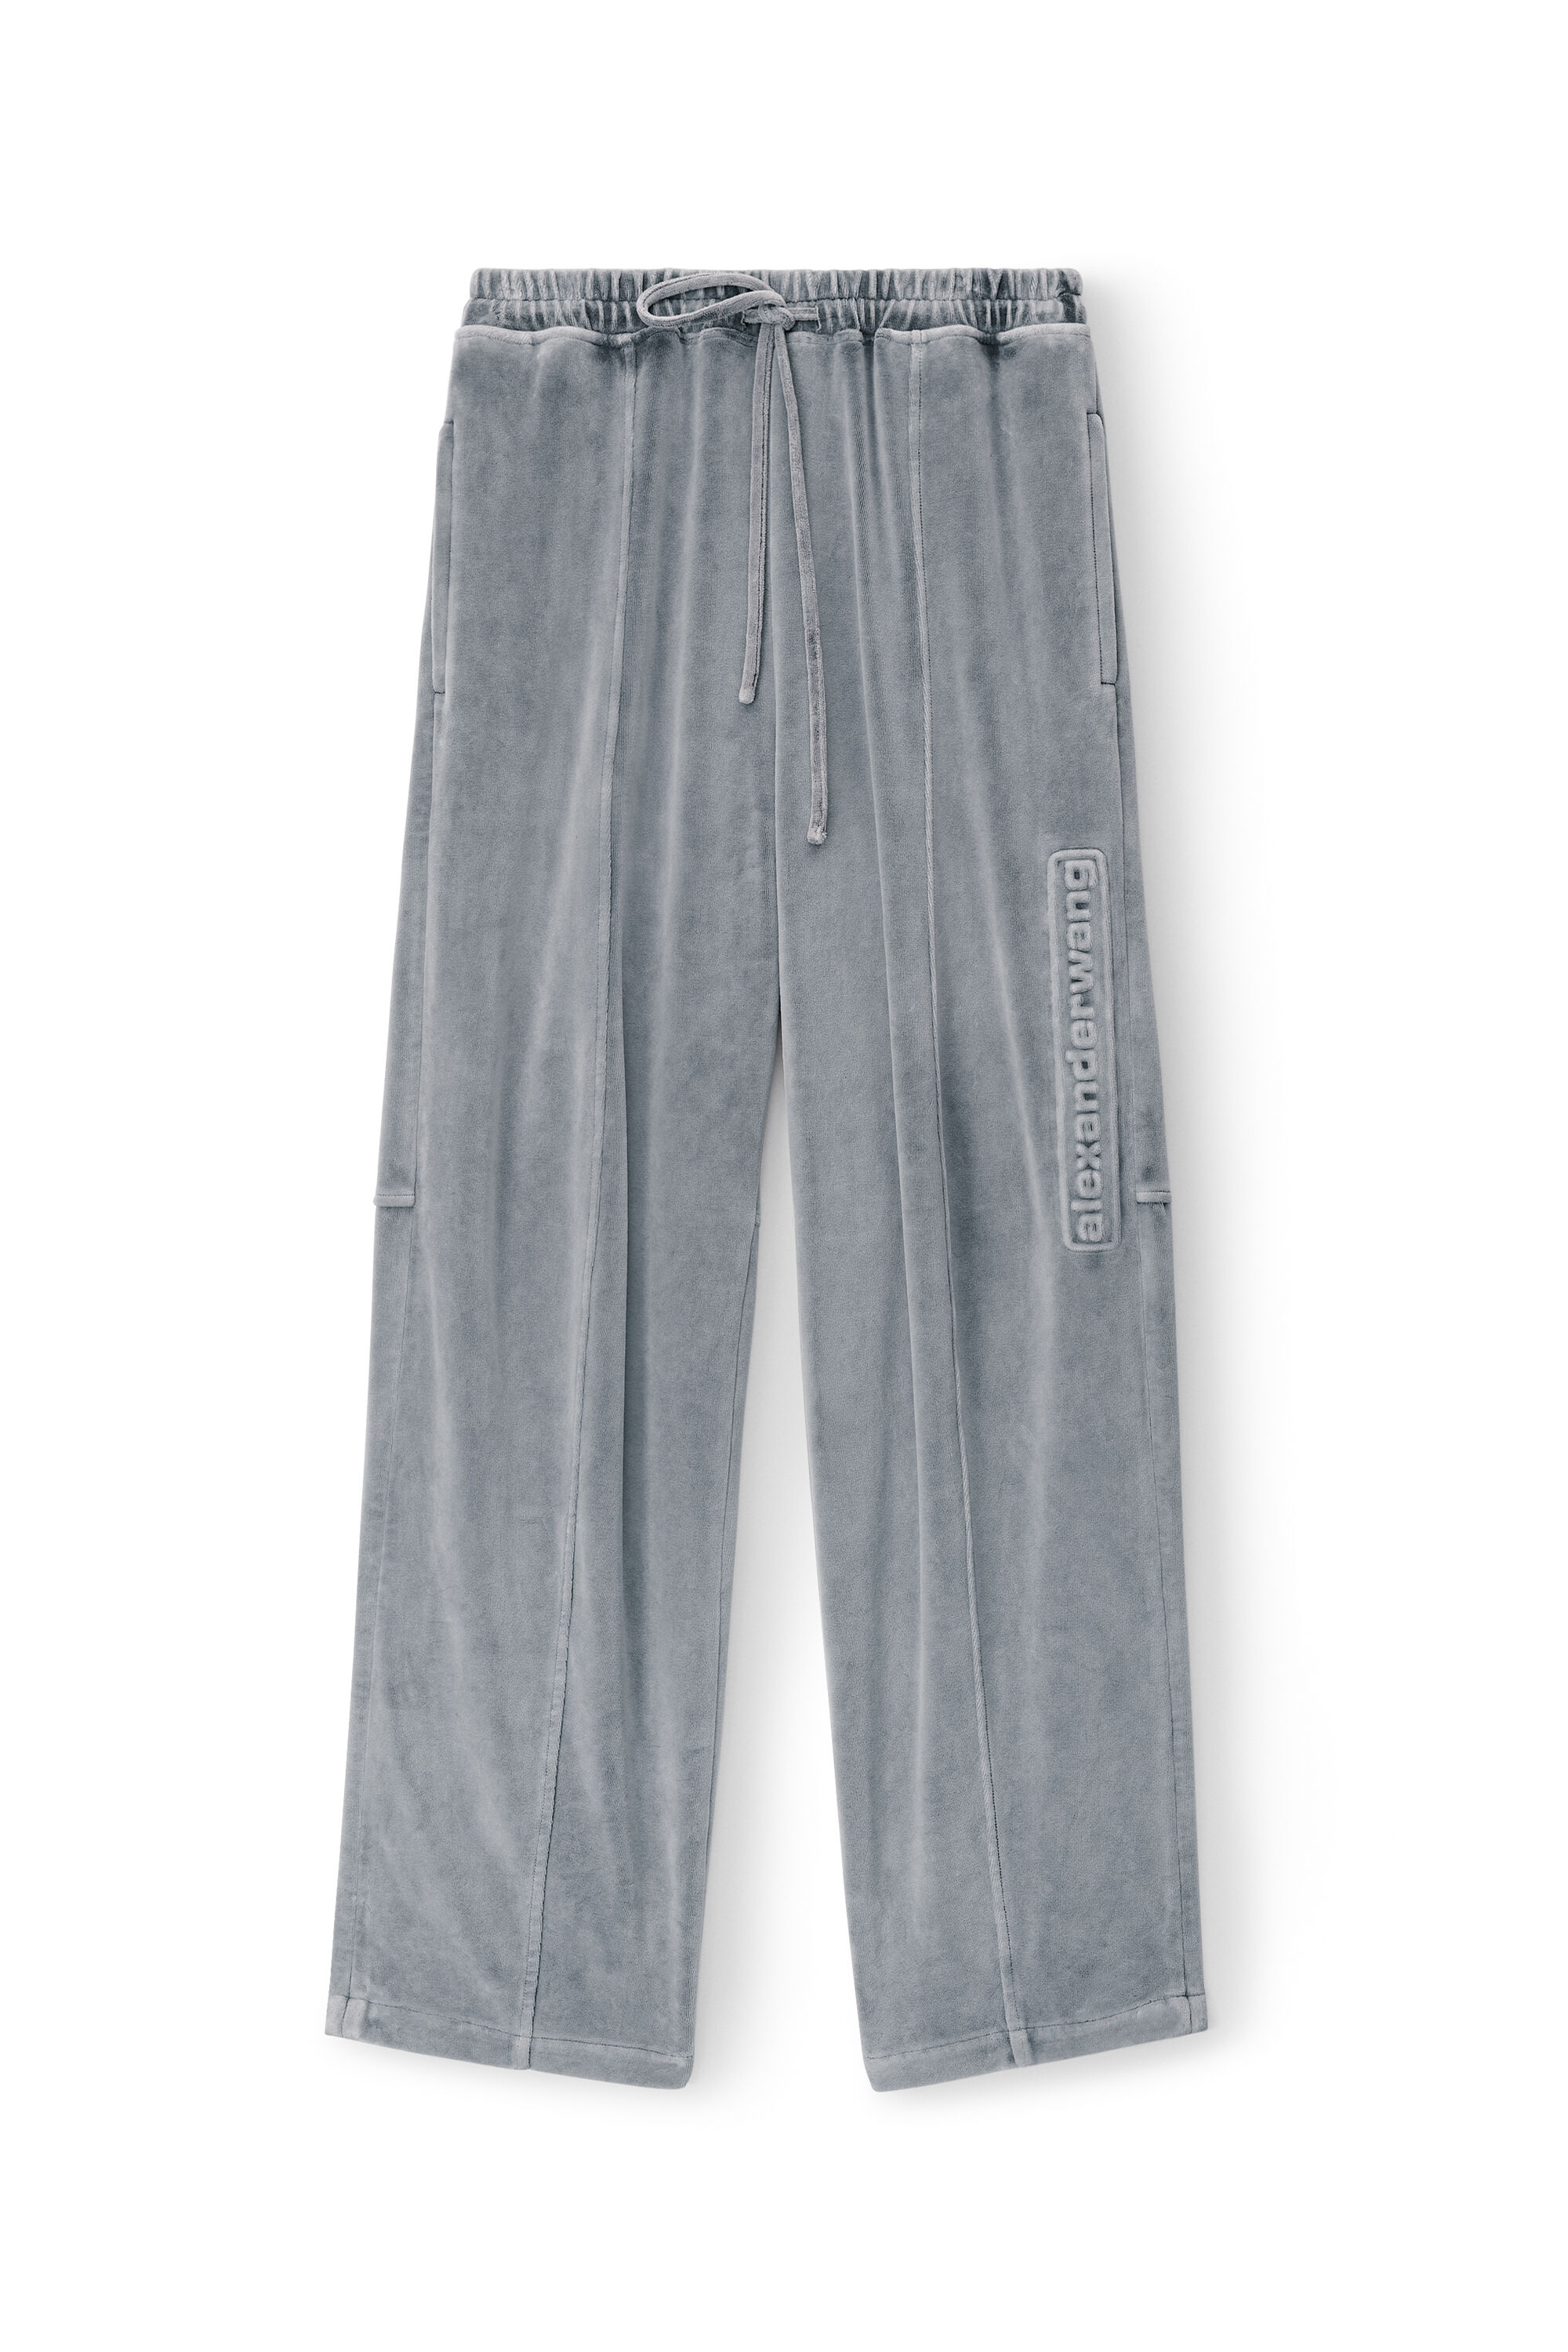 alexanderwang logo track pant in velour WASHED CHARCOAL 